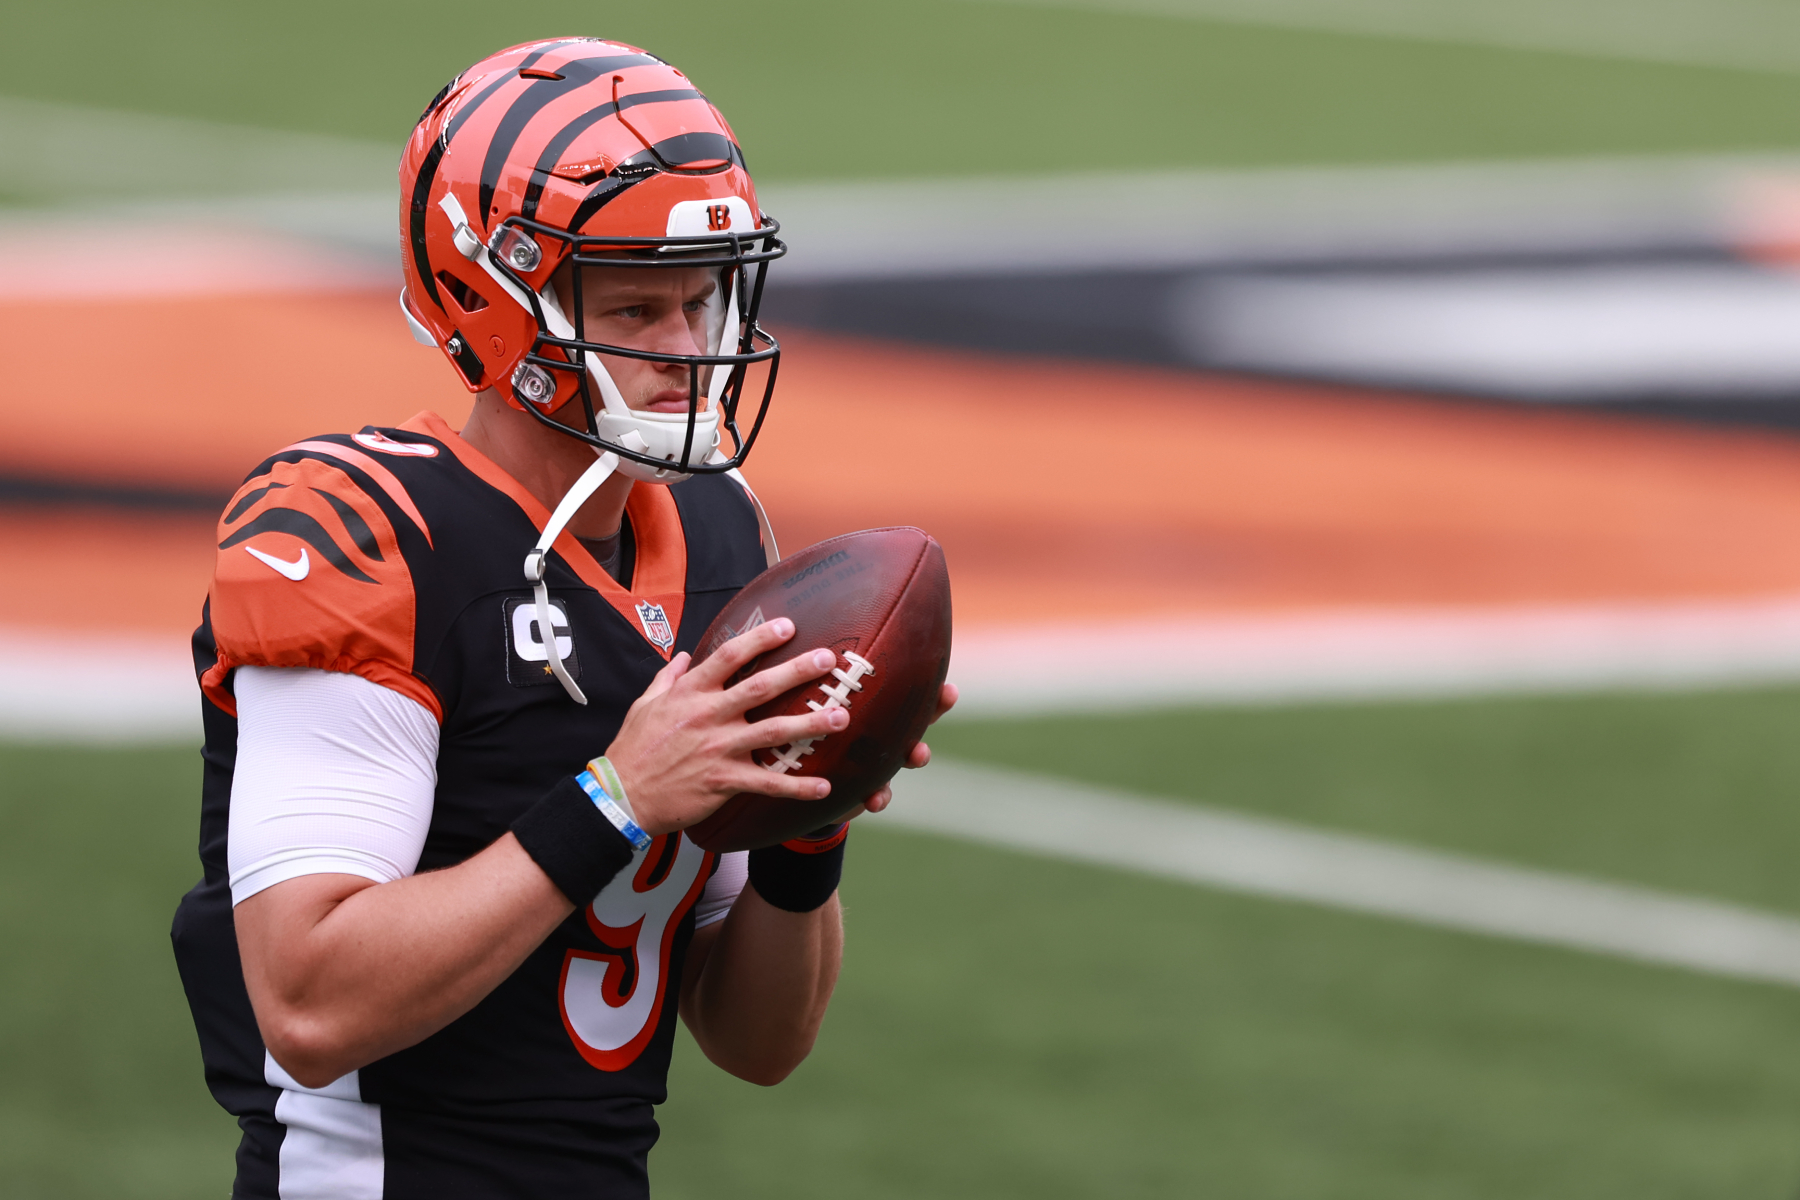 Joe Burrow is about to play in his first NFL primetime game with the Bengals. However, he doesn't seem to care about it being in primetime.